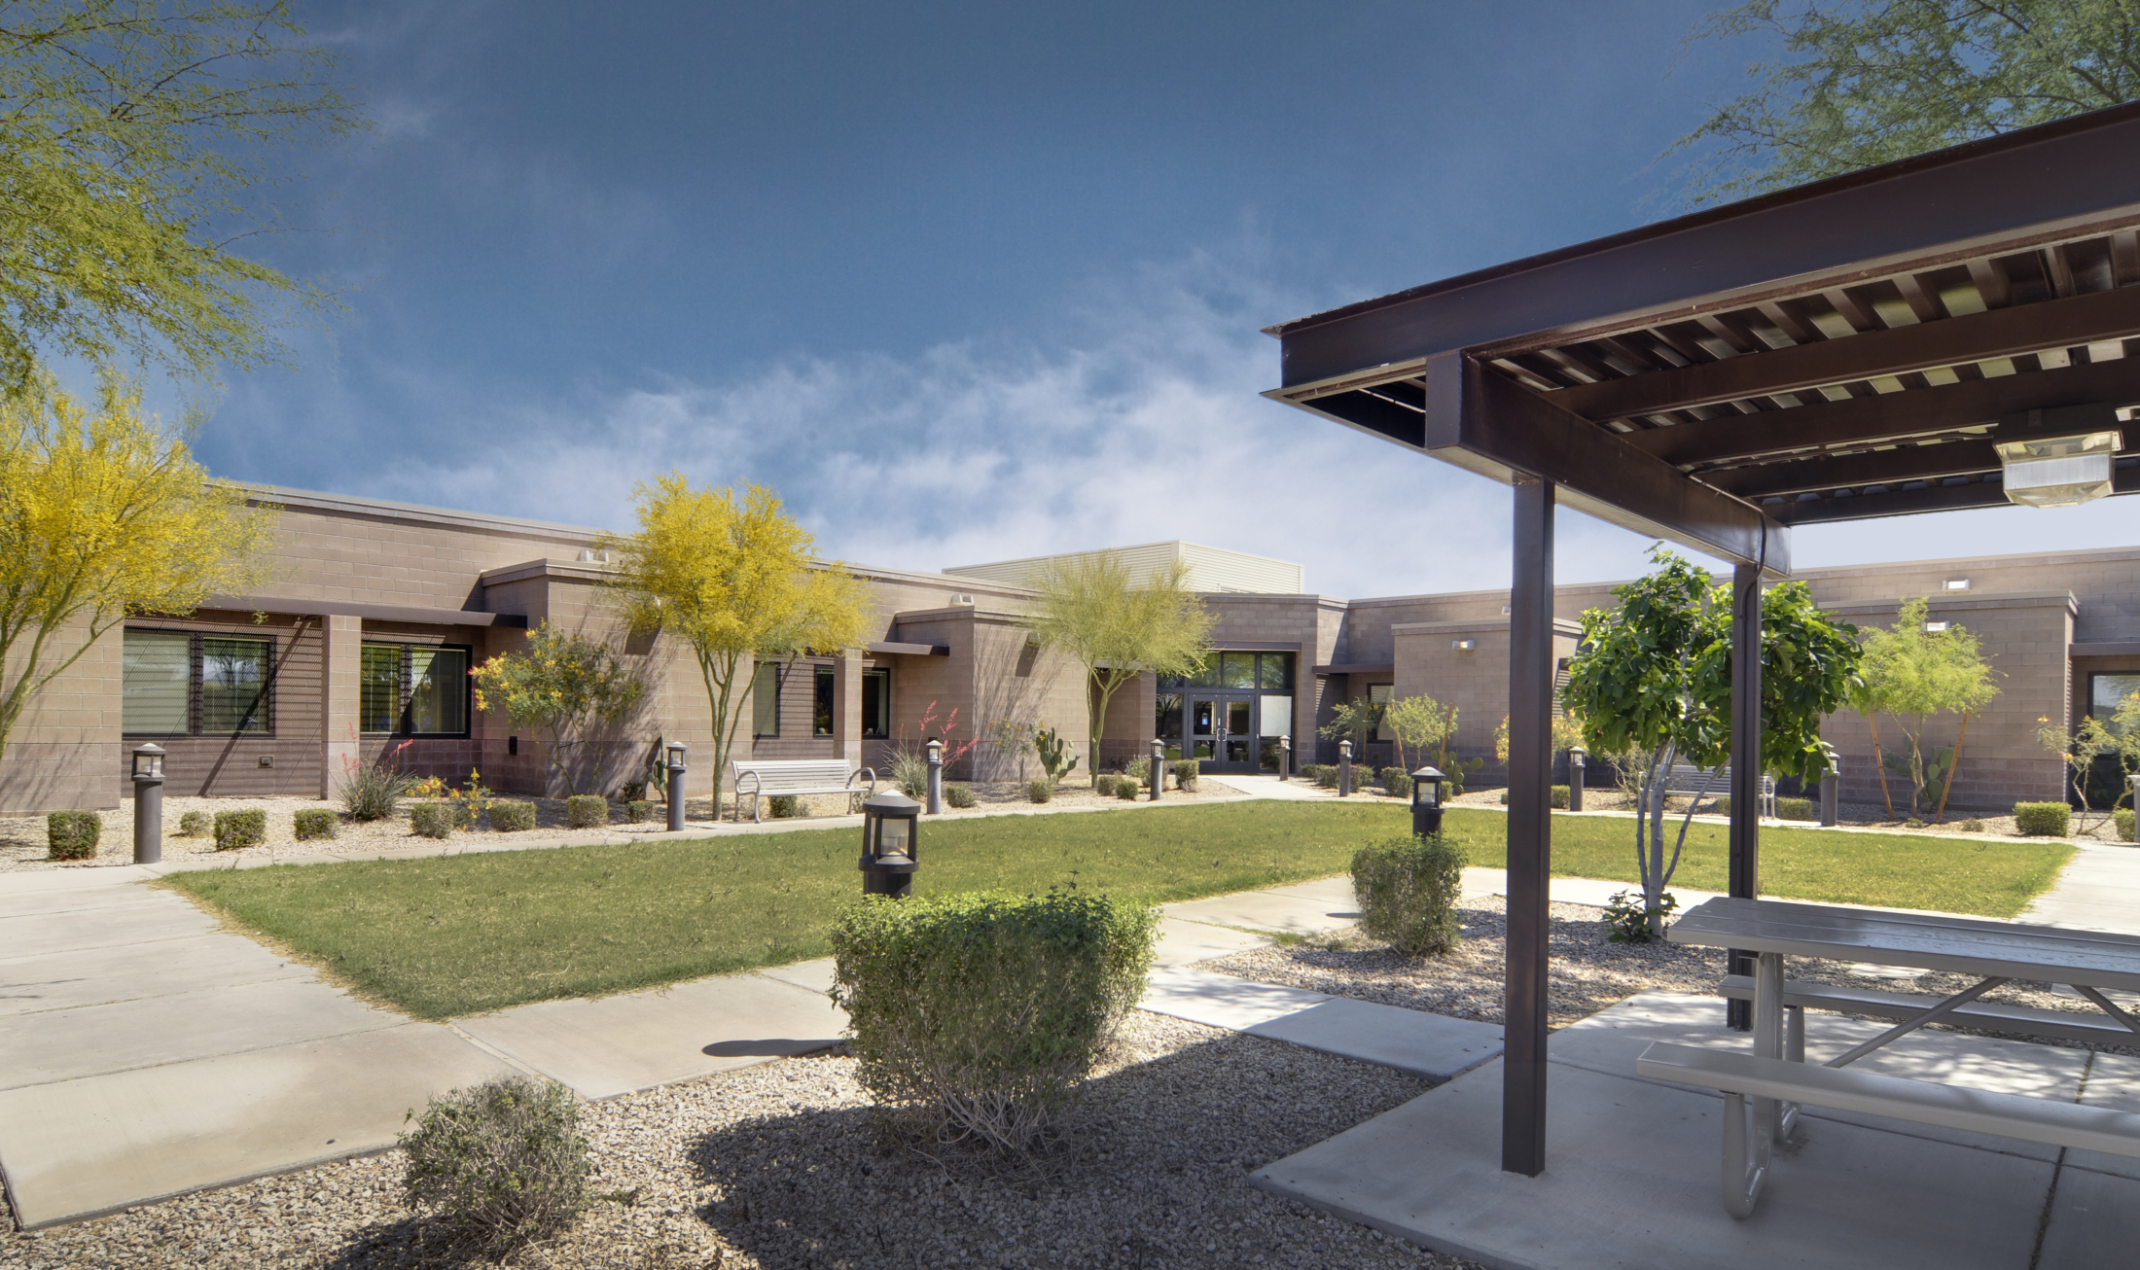 Outside view of Gila River Skilled Nursing Facility